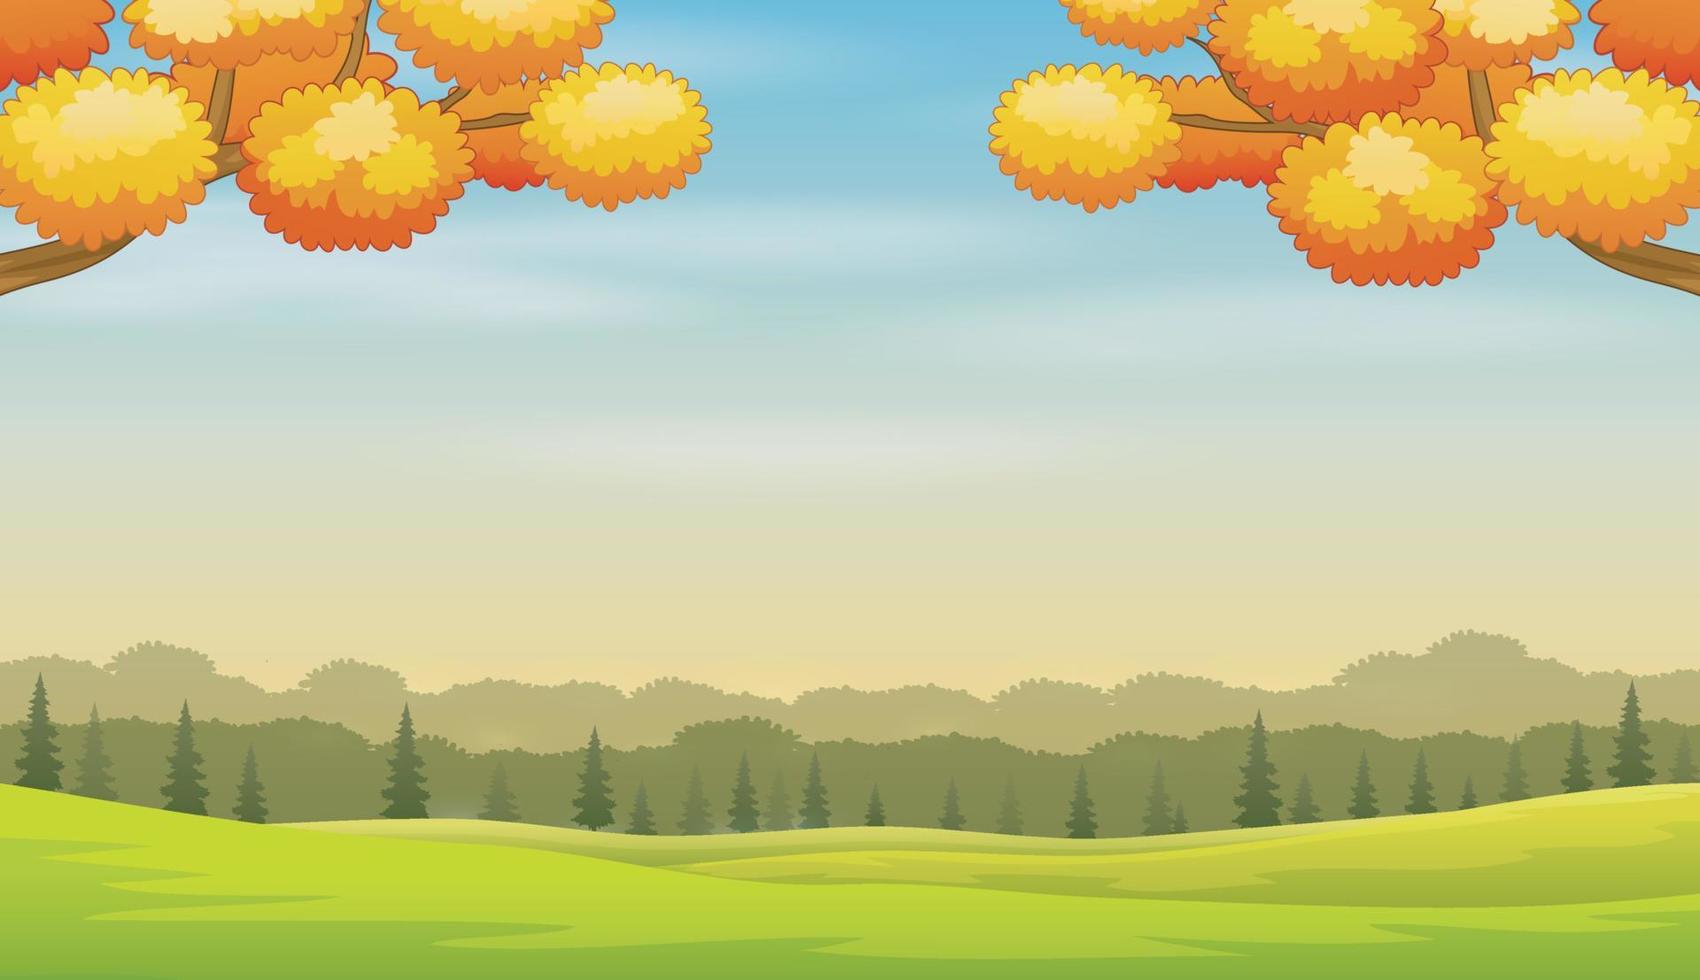 Autumn landscape with green land background vector